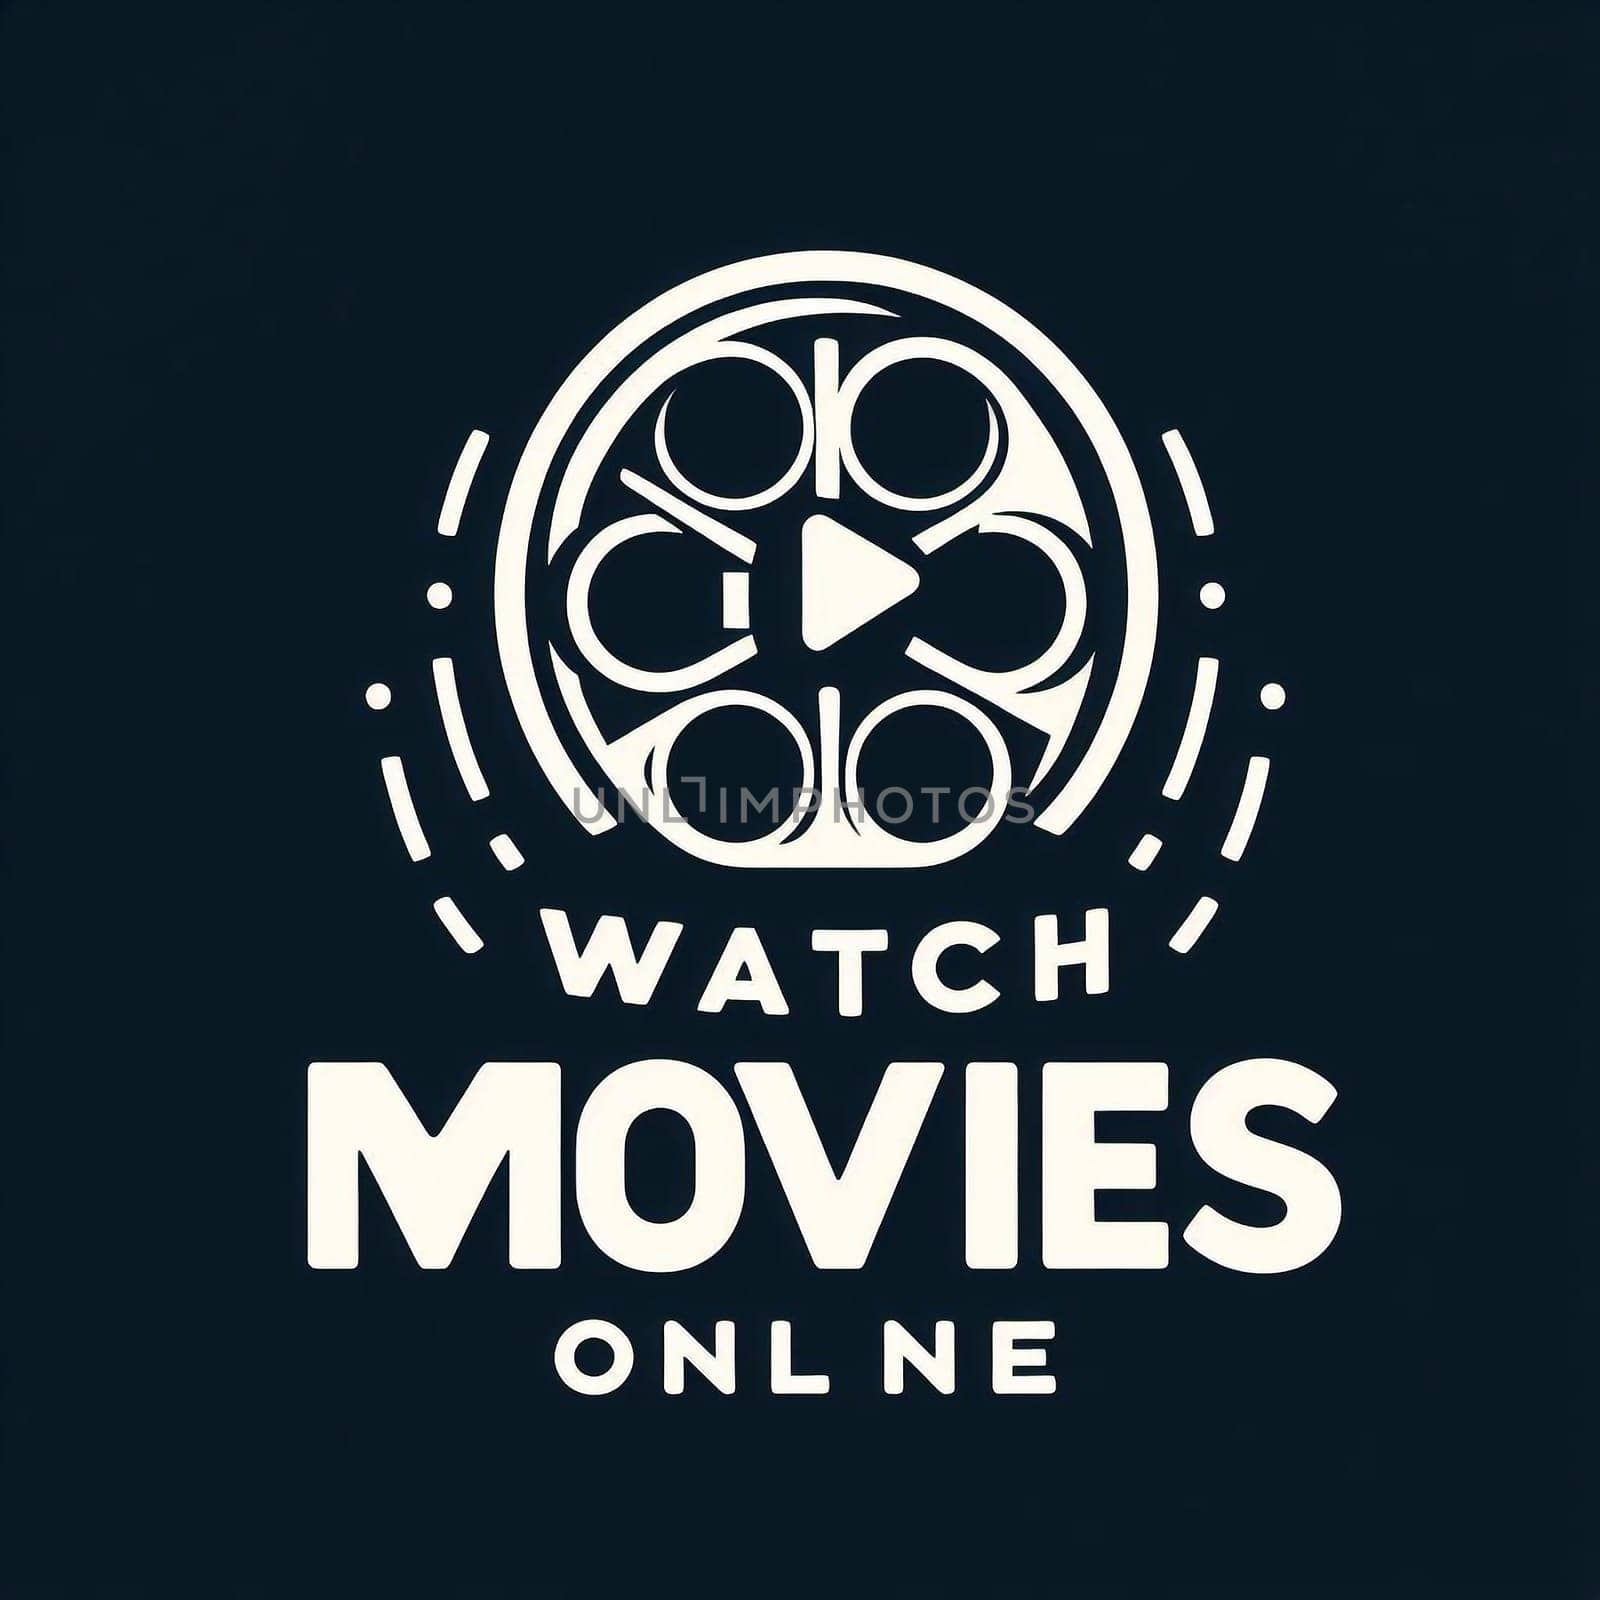 Watch movies and TV series online logo by architectphd